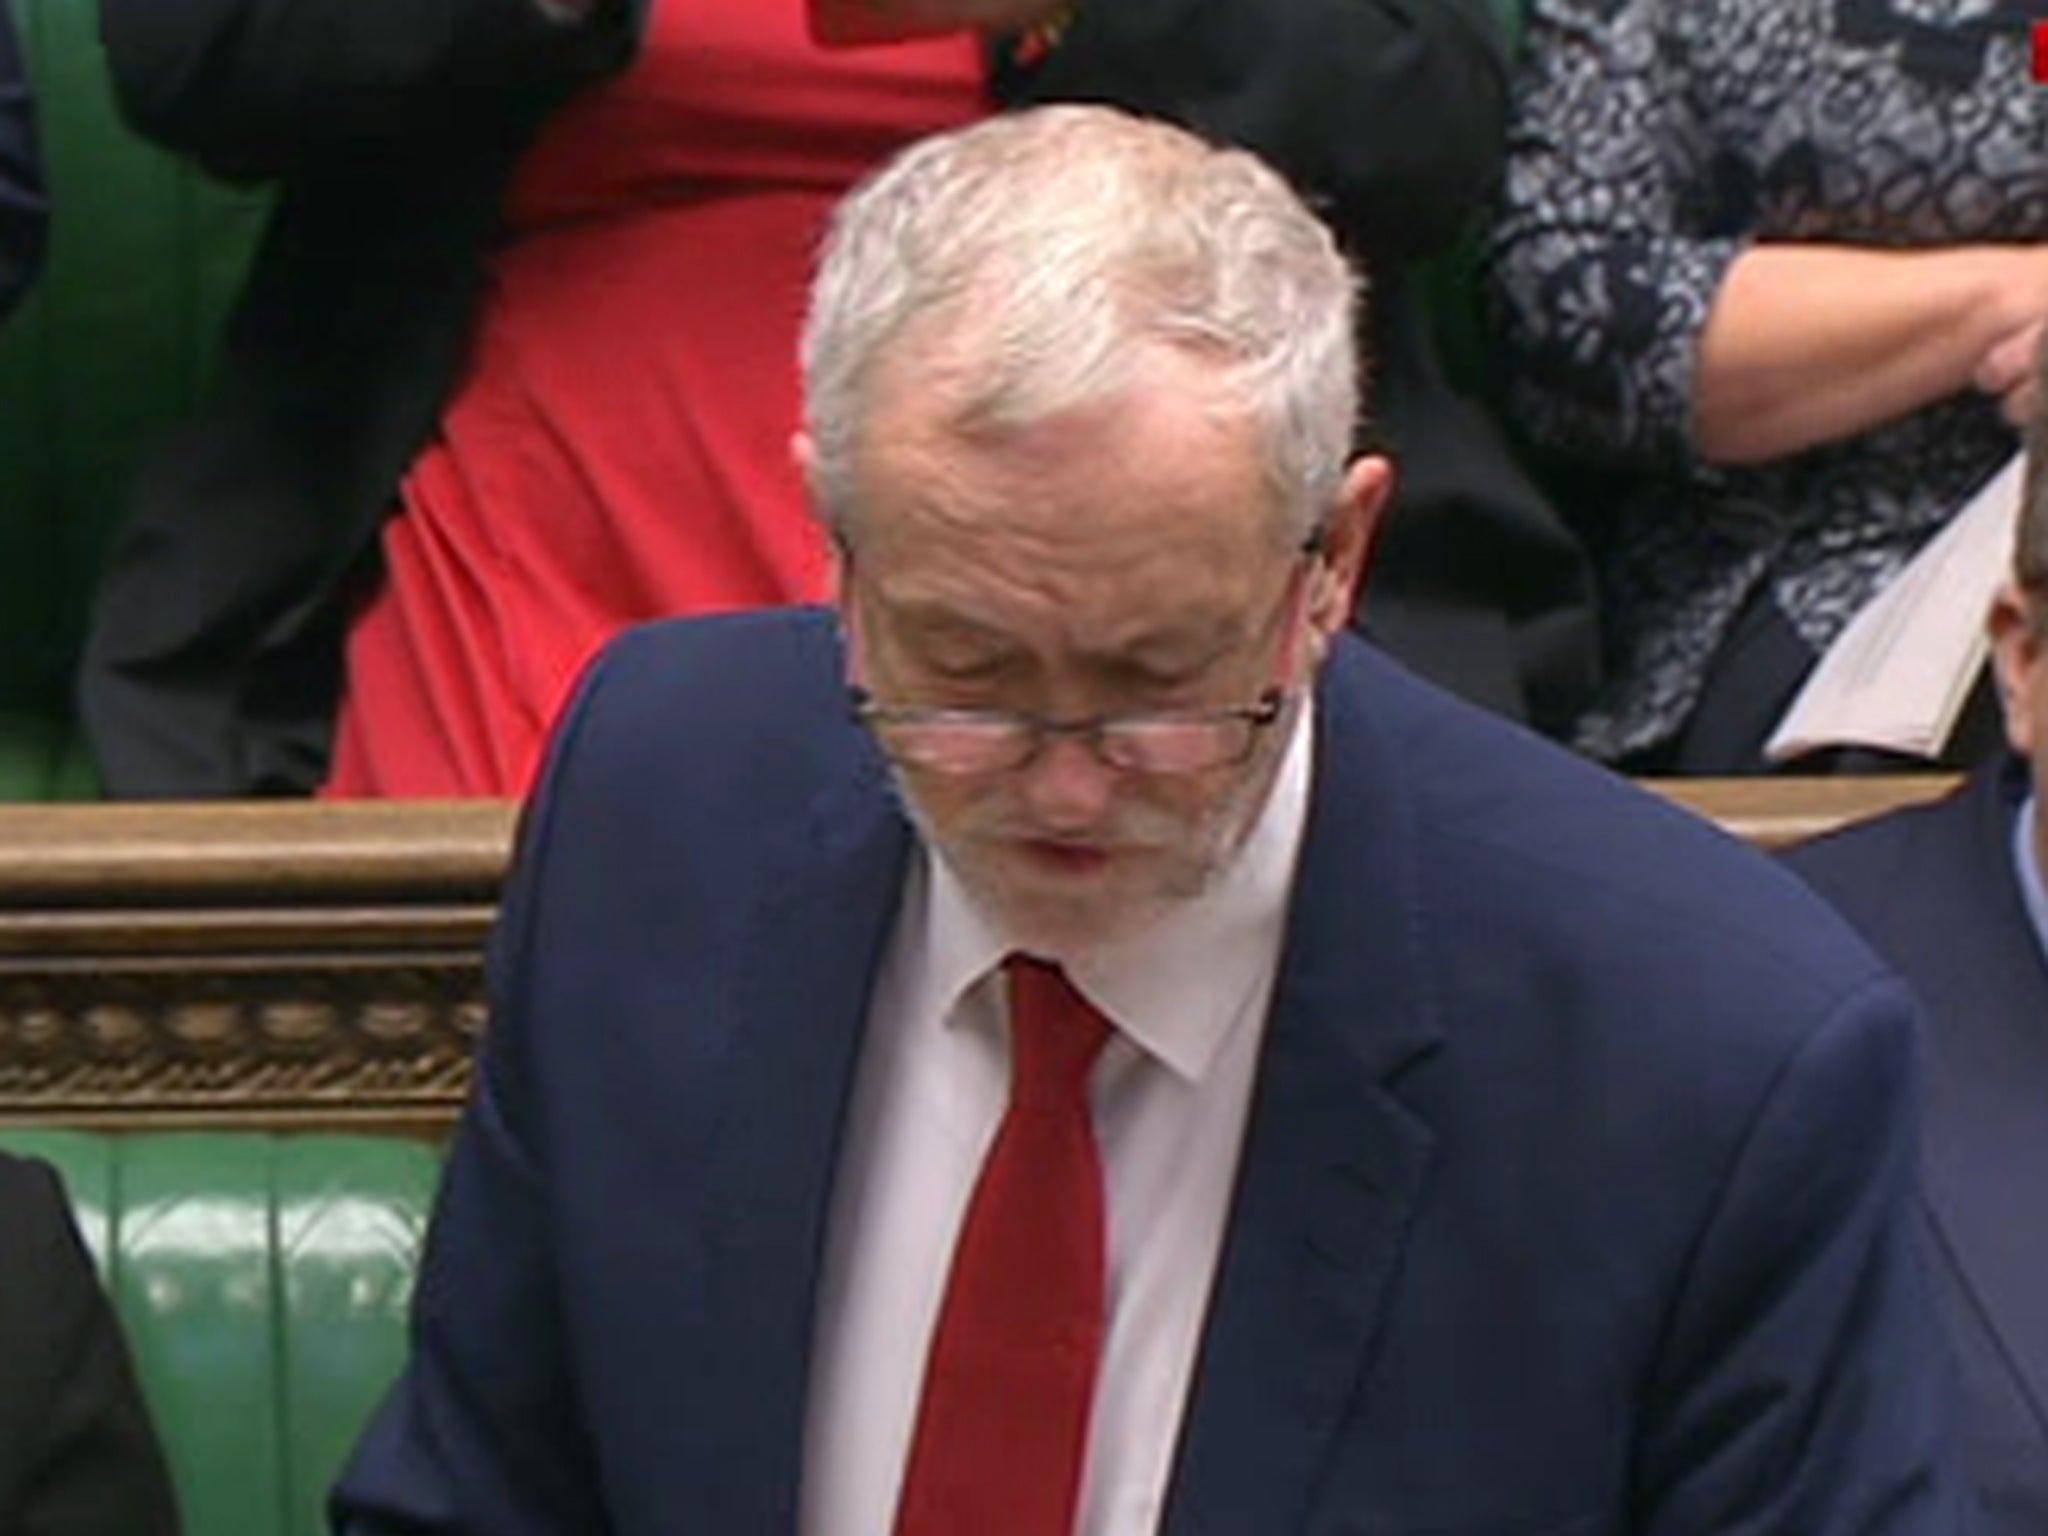 Labour leader Jeremy Corbyn asked the Prime Minister about the crisis in social care